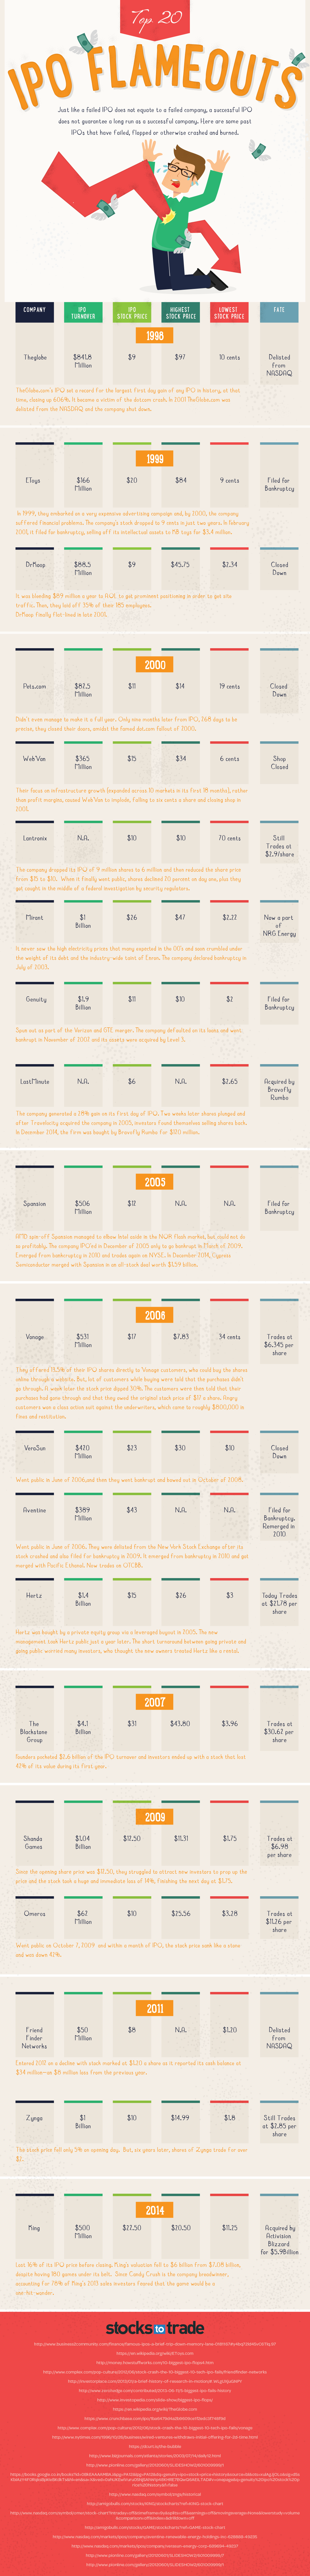 Top 20 IPO Flameouts (Infographic)